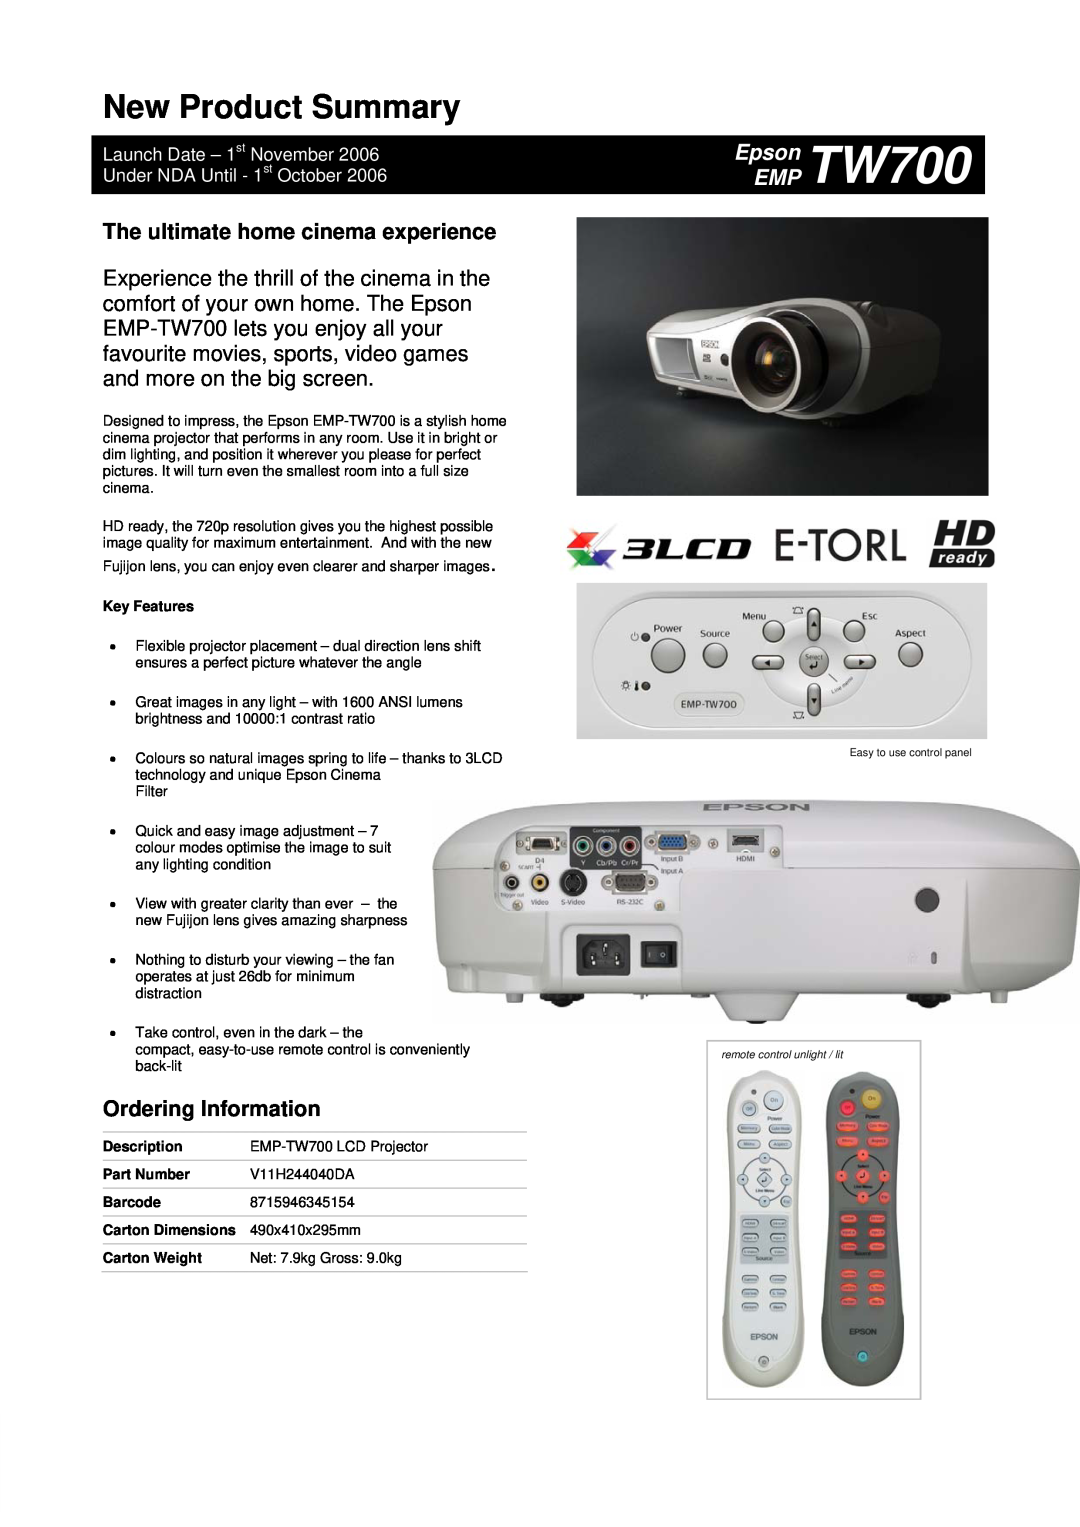 Epson EMP-TW700 dimensions The ultimate home cinema experience, Ordering Information, New Product Summary, Epson TW700 EMP 